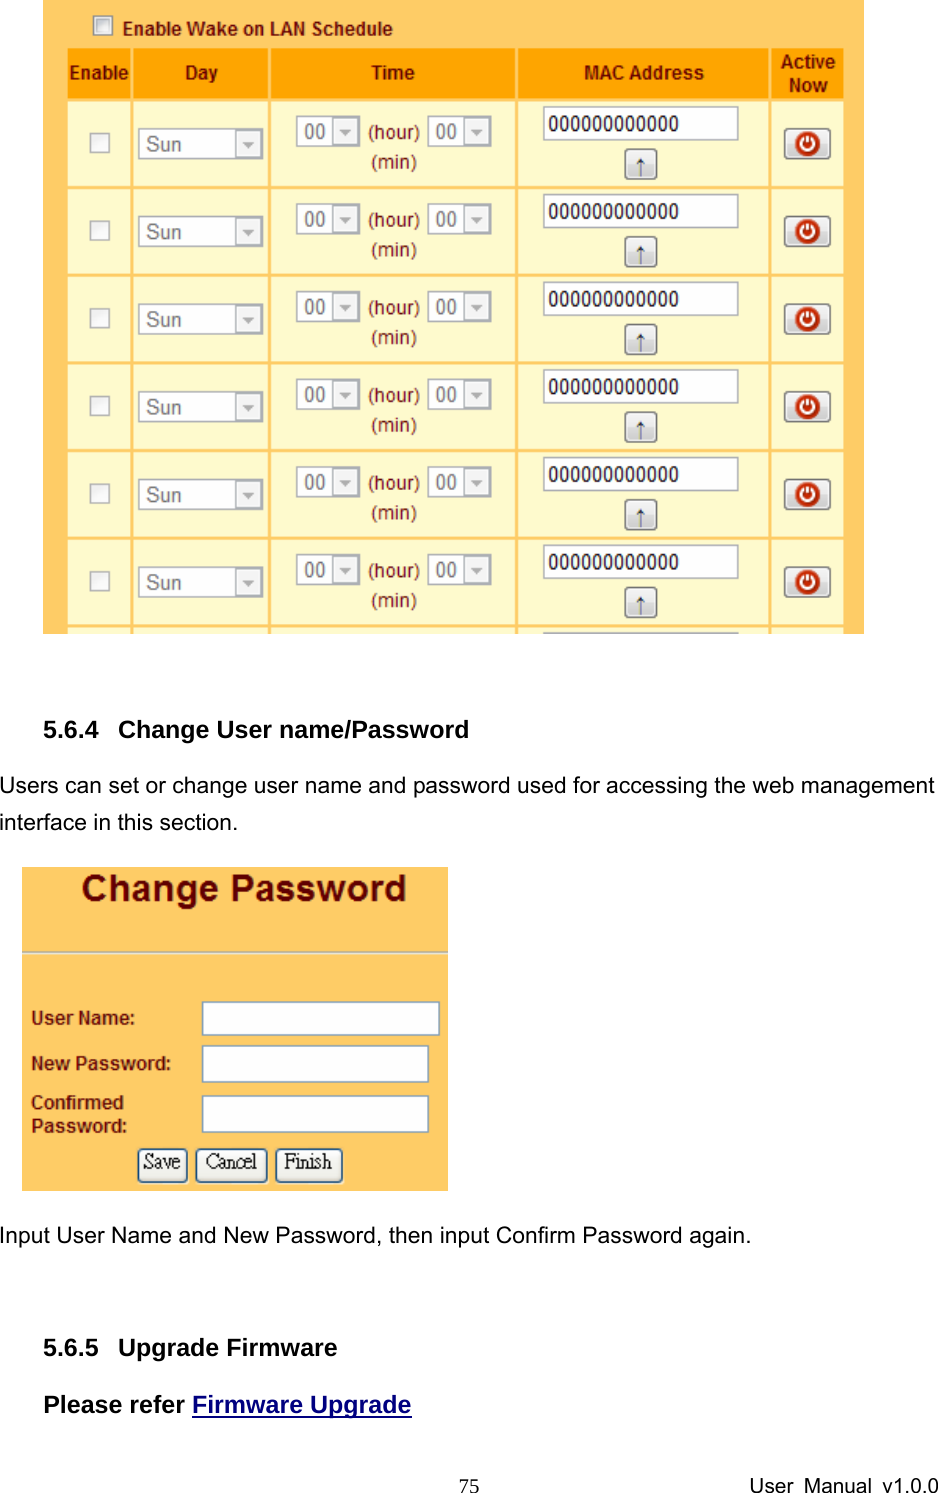                 User Manual v1.0.0 75  5.6.4  Change User name/Password Users can set or change user name and password used for accessing the web management interface in this section.     Input User Name and New Password, then input Confirm Password again.  5.6.5 Upgrade Firmware Please refer Firmware Upgrade 